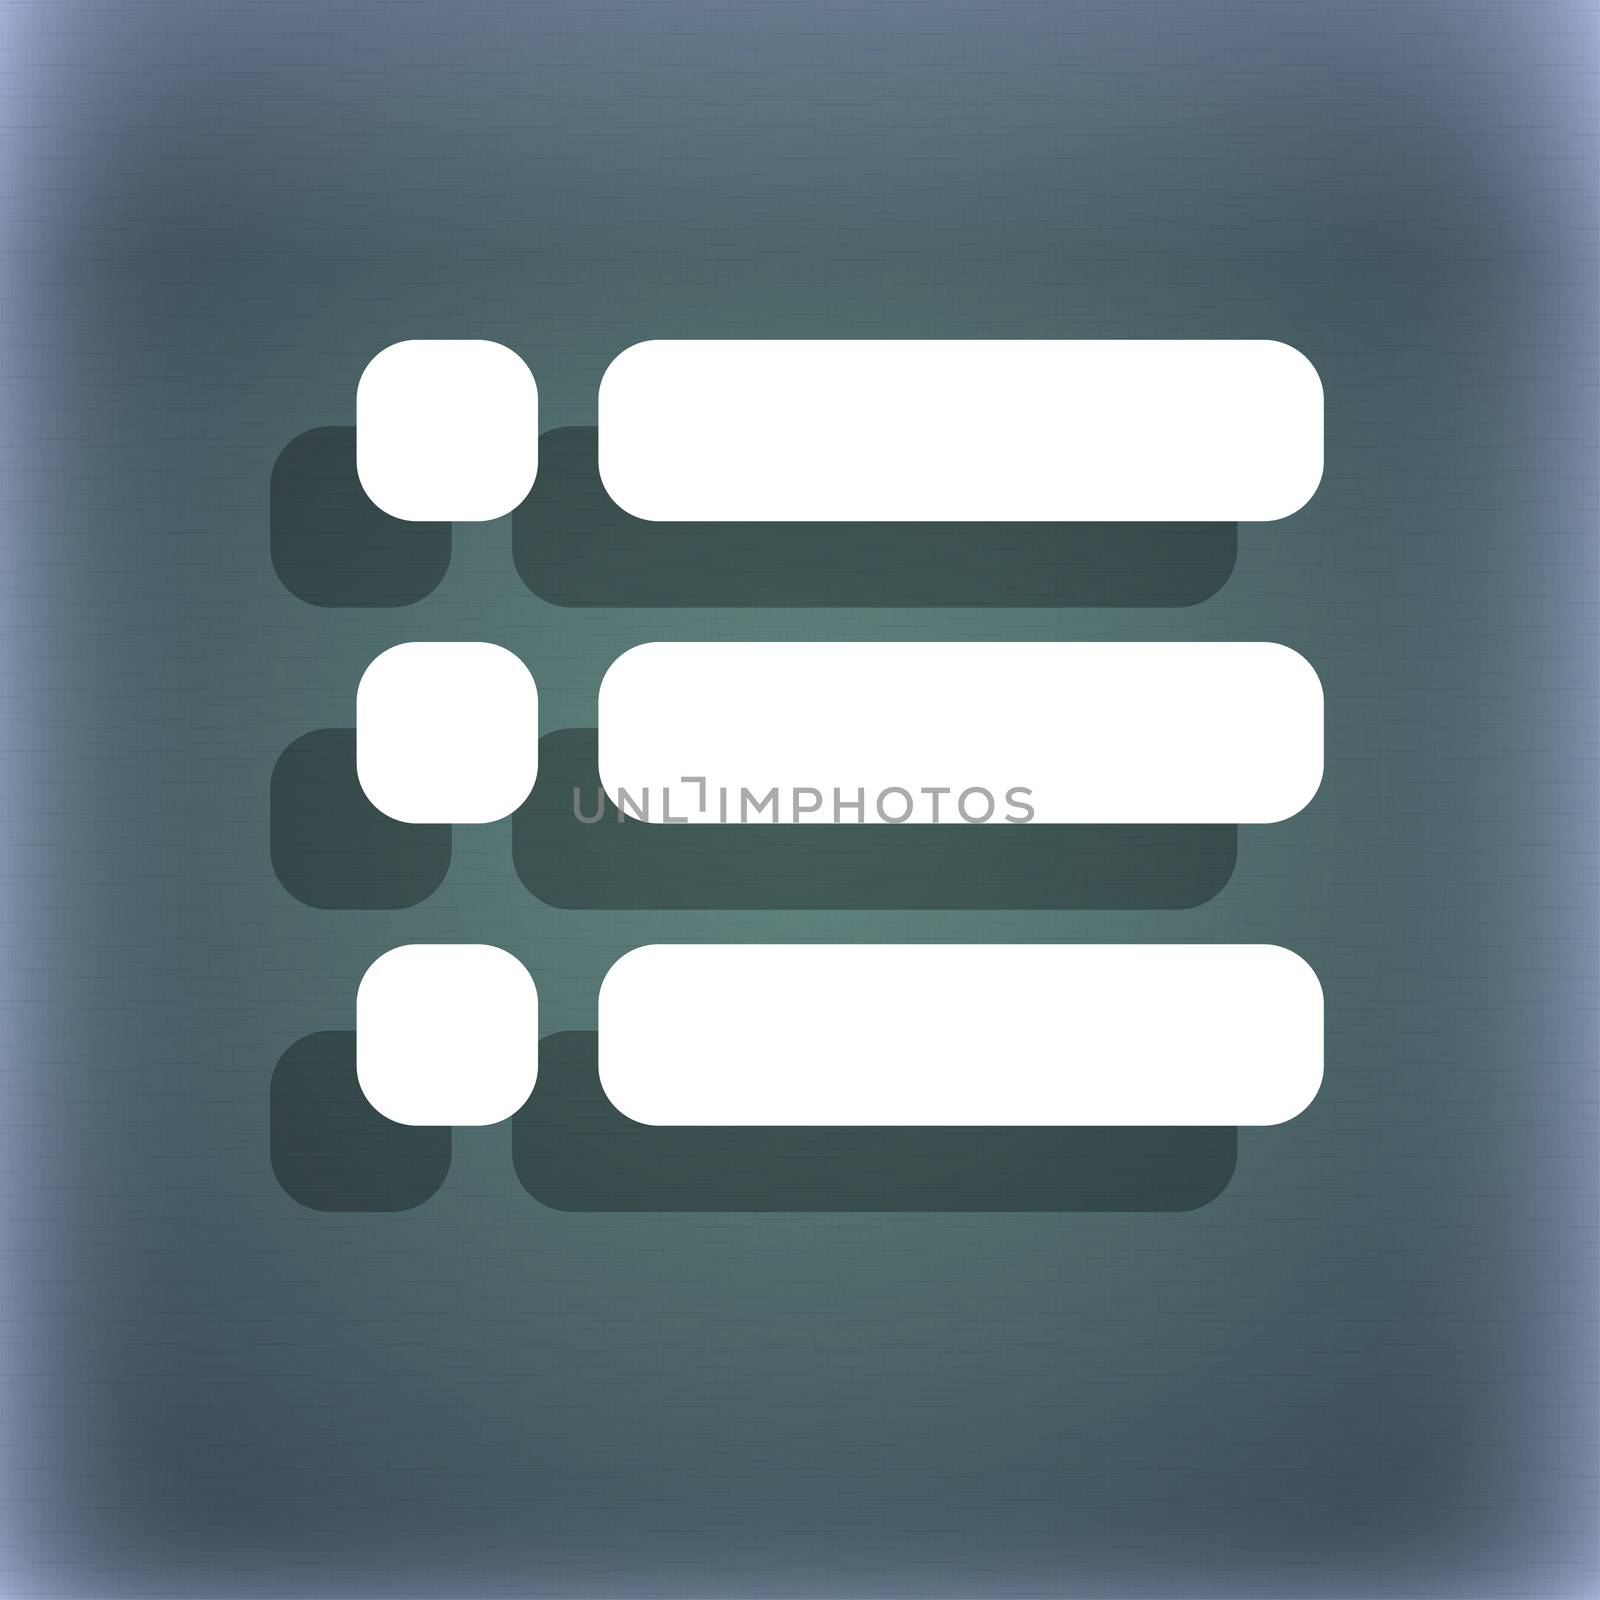 List menu, Content view options icon symbol on the blue-green abstract background with shadow and space for your text. illustration